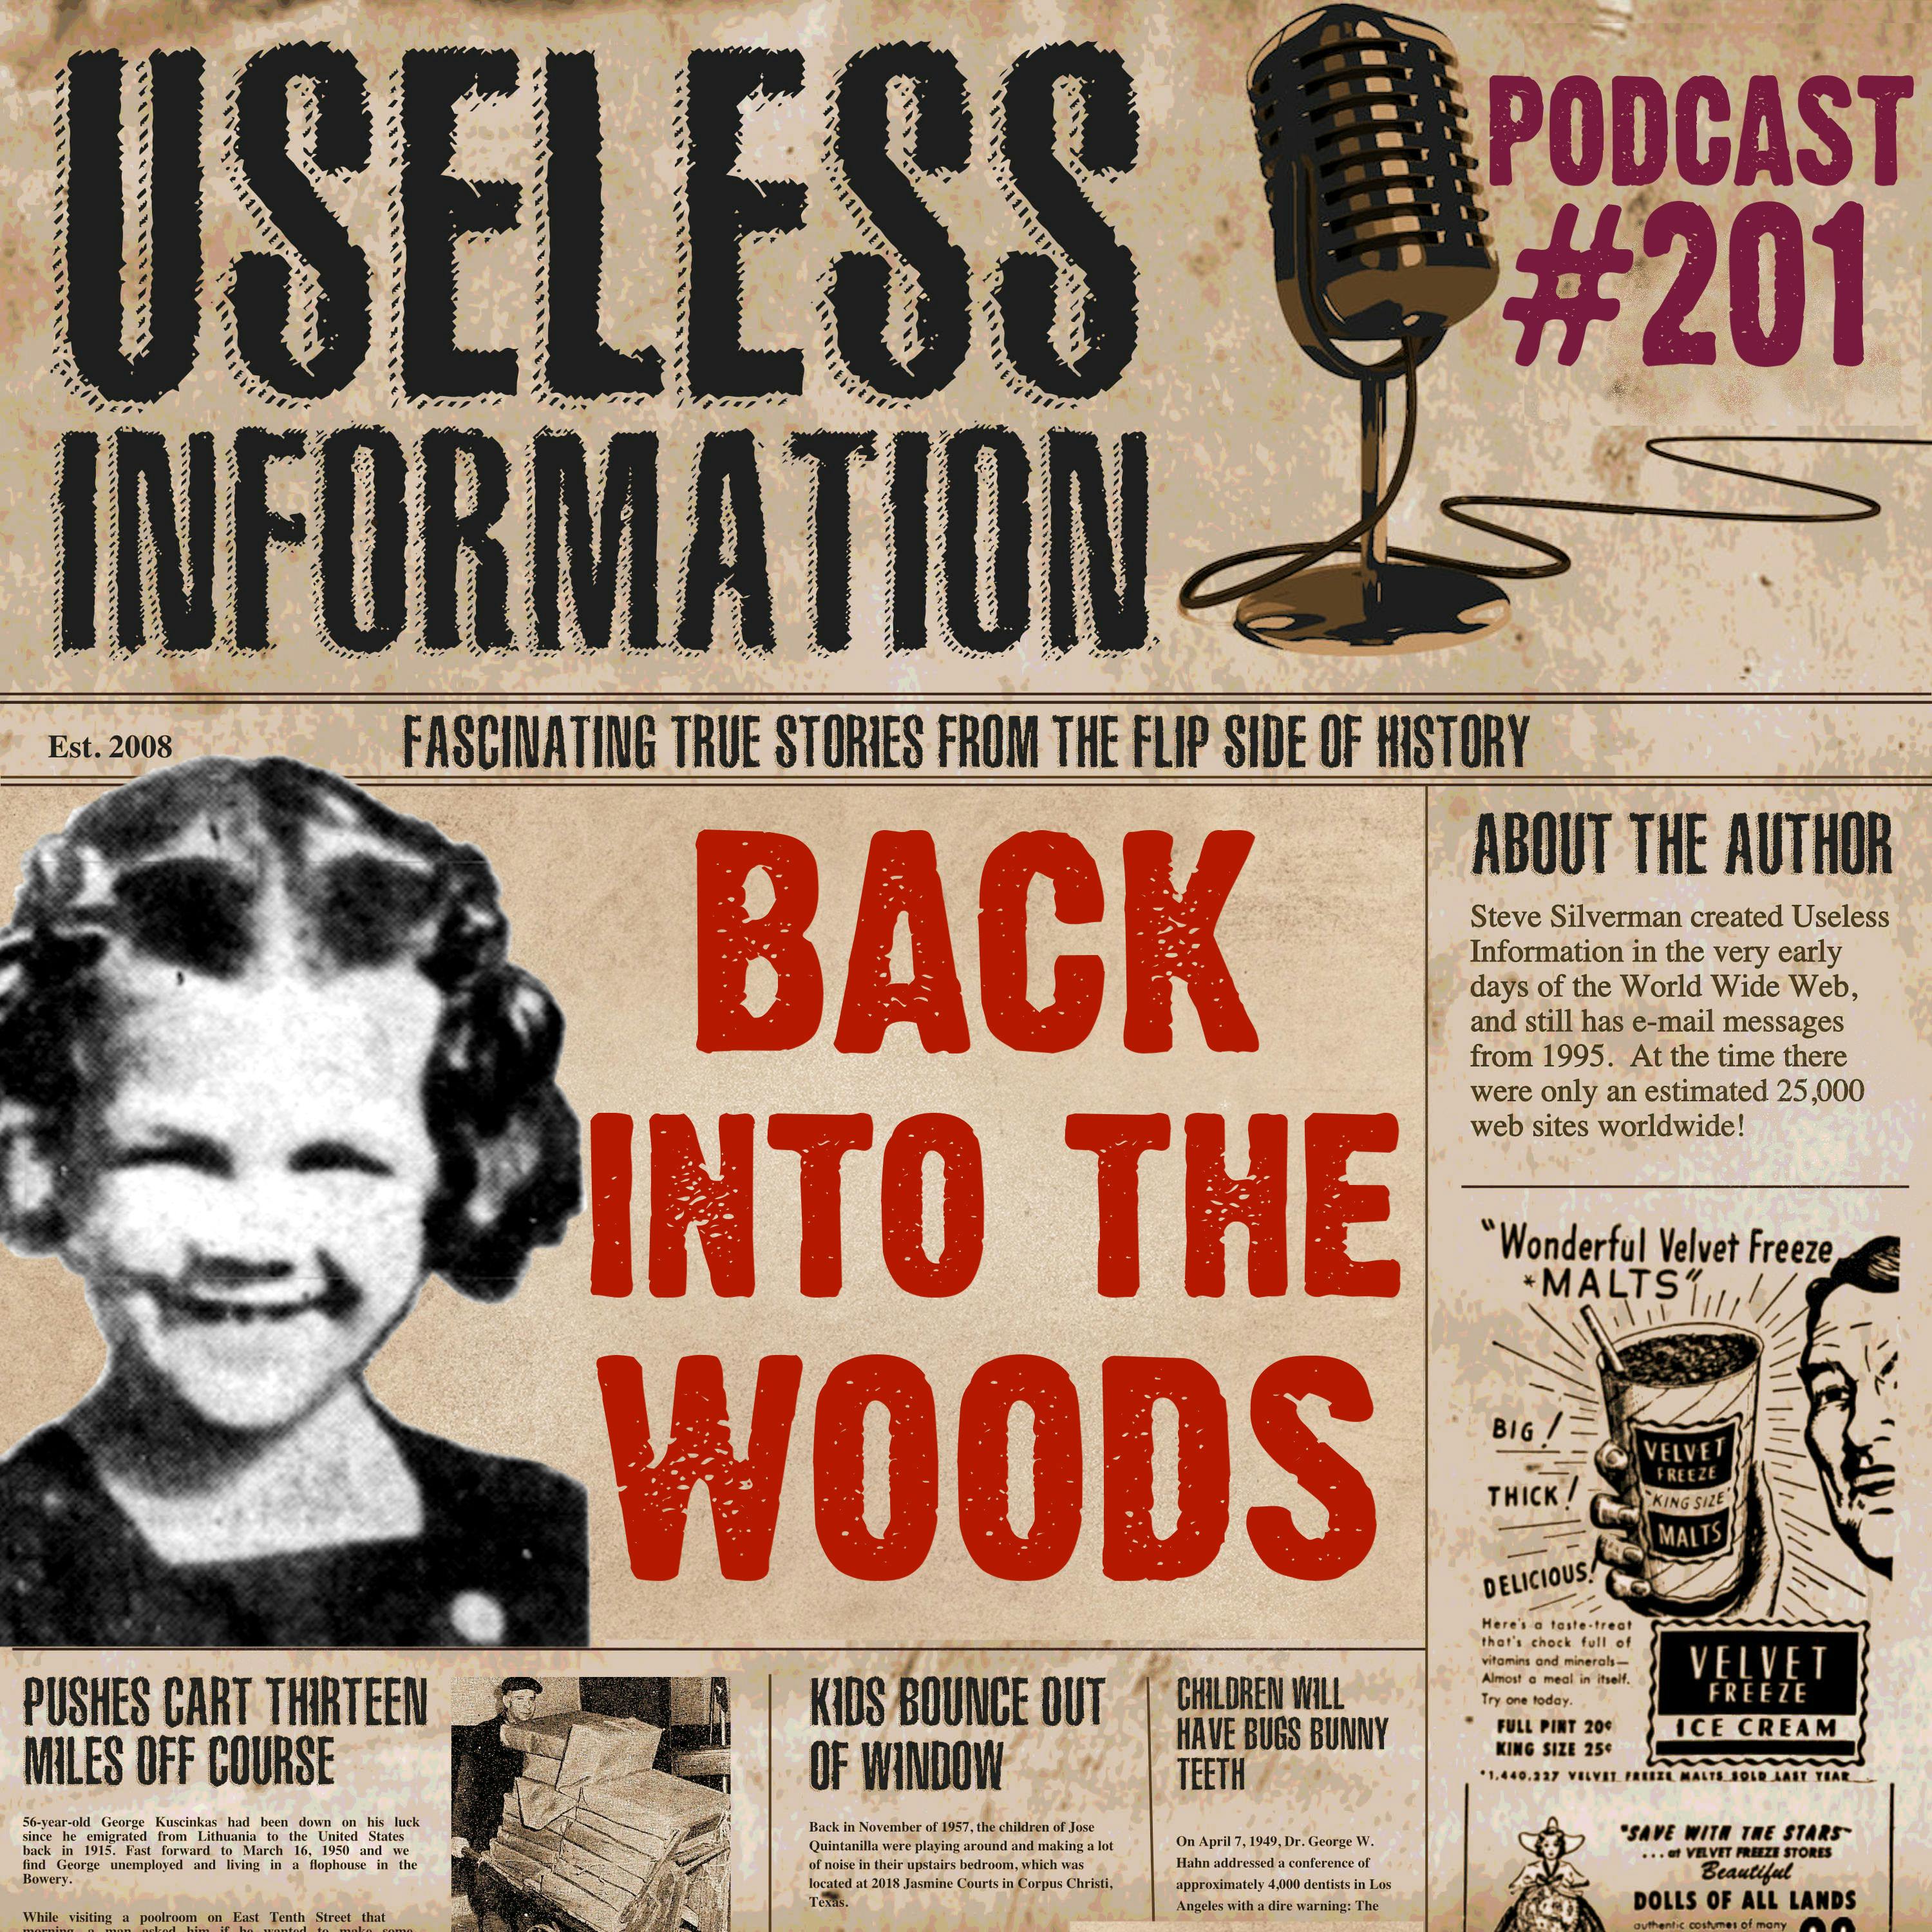 Back Into the Woods - Podcast #201